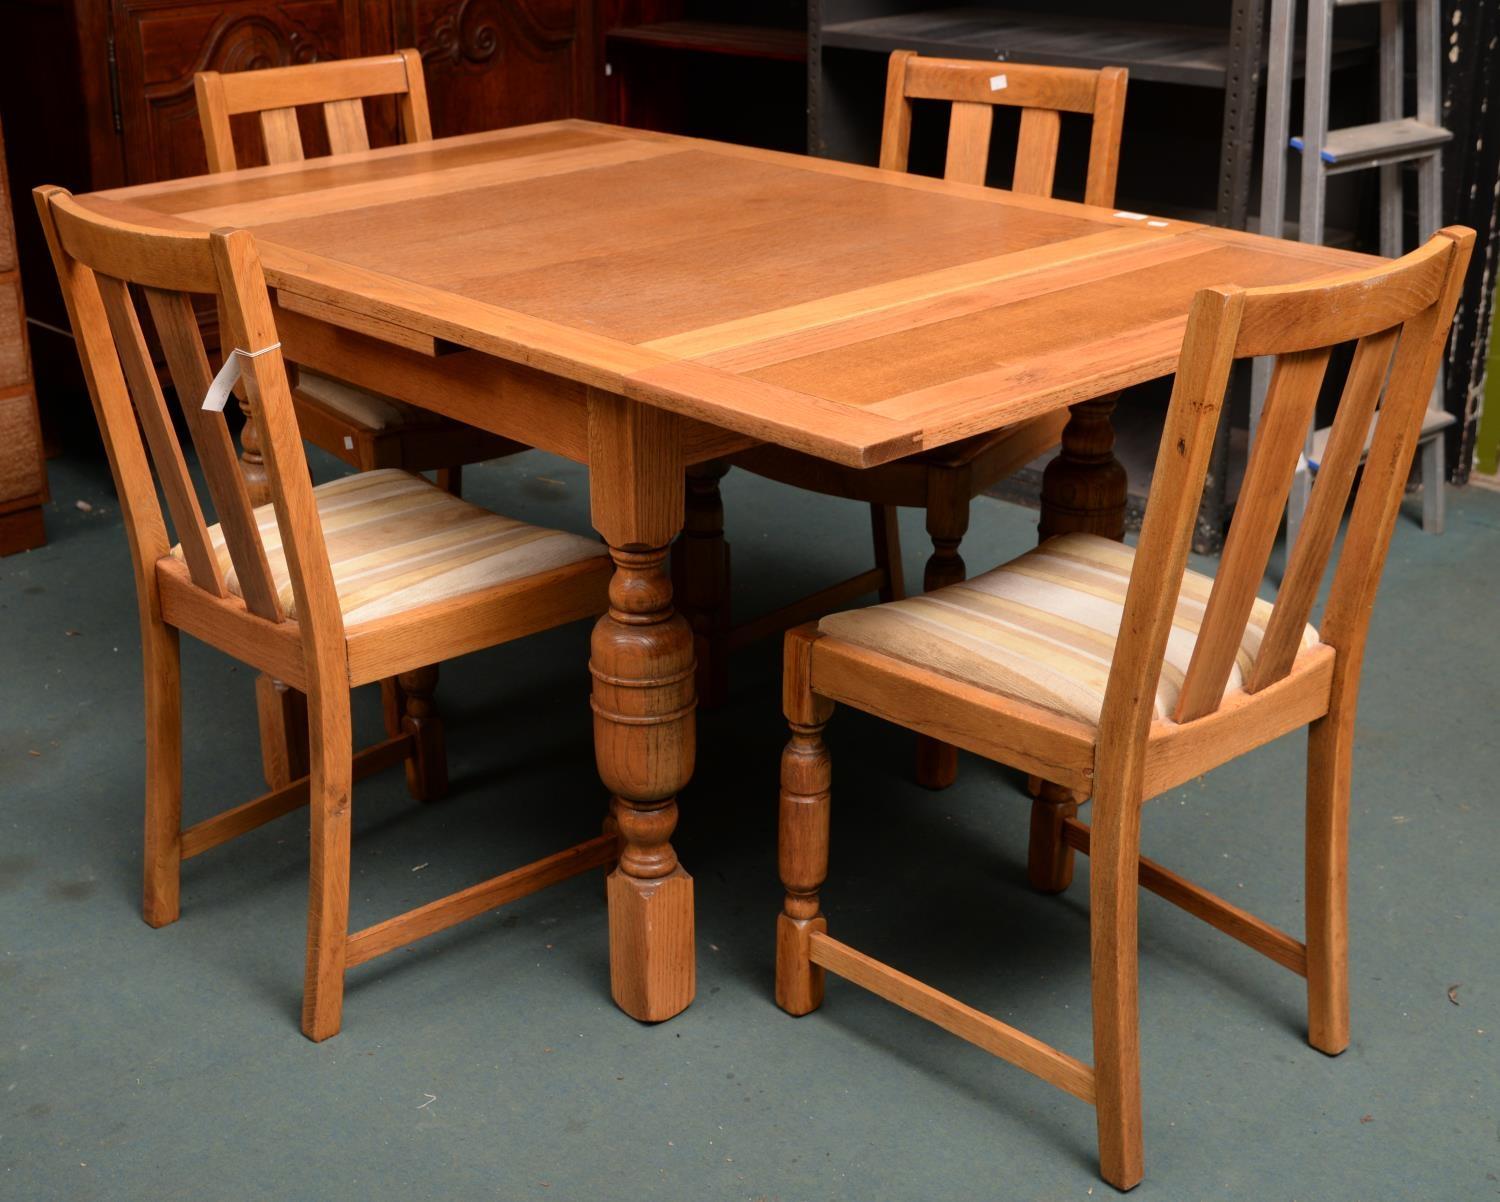 A LIGHT OAK DRAW LEAF TABLE AND A SET OF FOUR CHAIRS, TABLE 74CM H; 91 X 91CM Good clean solid